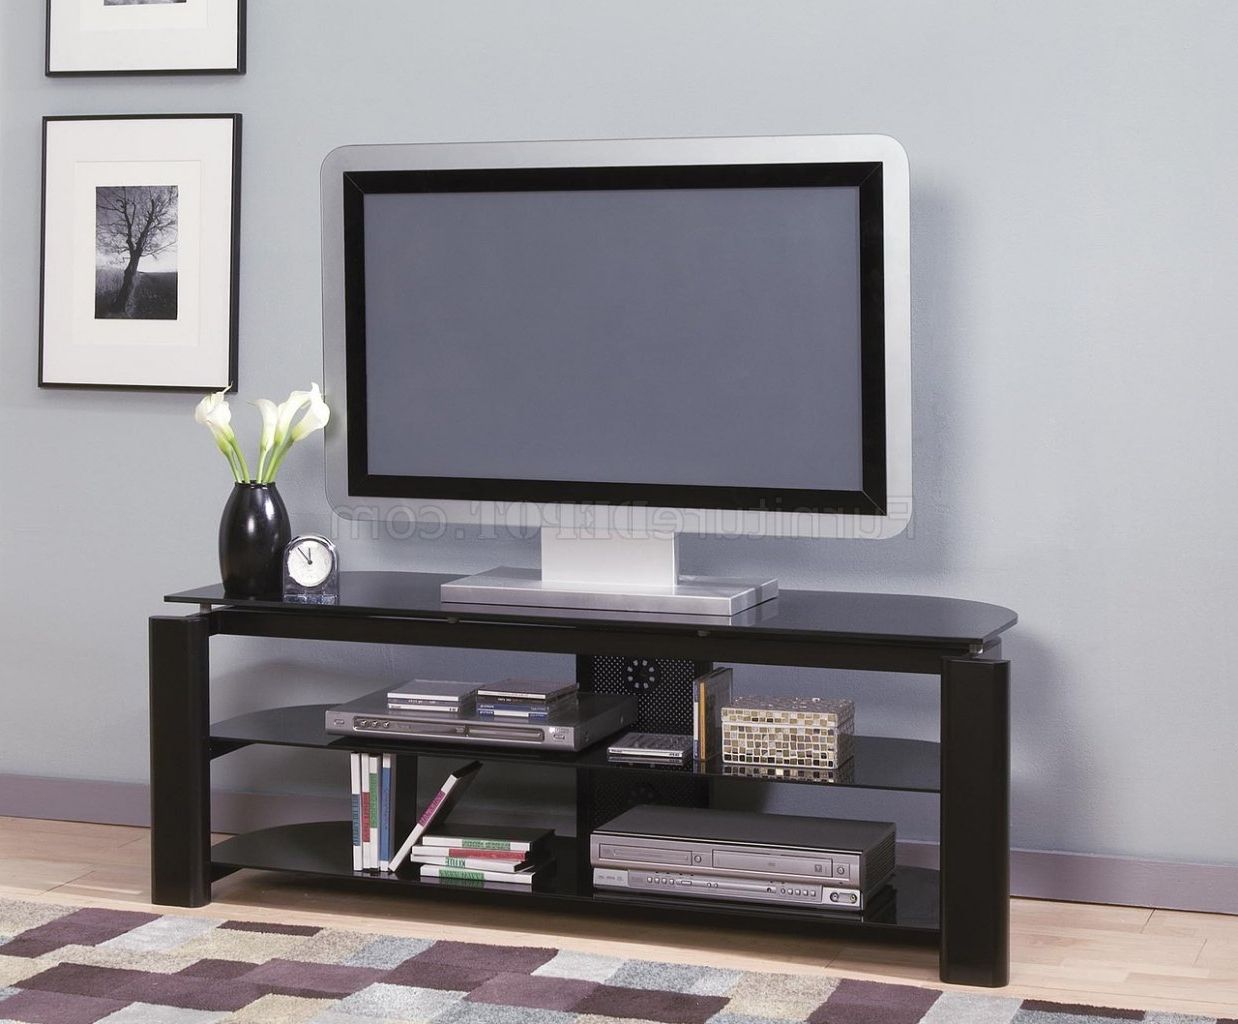 Black Glass & Metal Modern Tv Stand W/storage Shelves For Fashionable Glass Tv Stands With Storage Shelf (View 10 of 10)